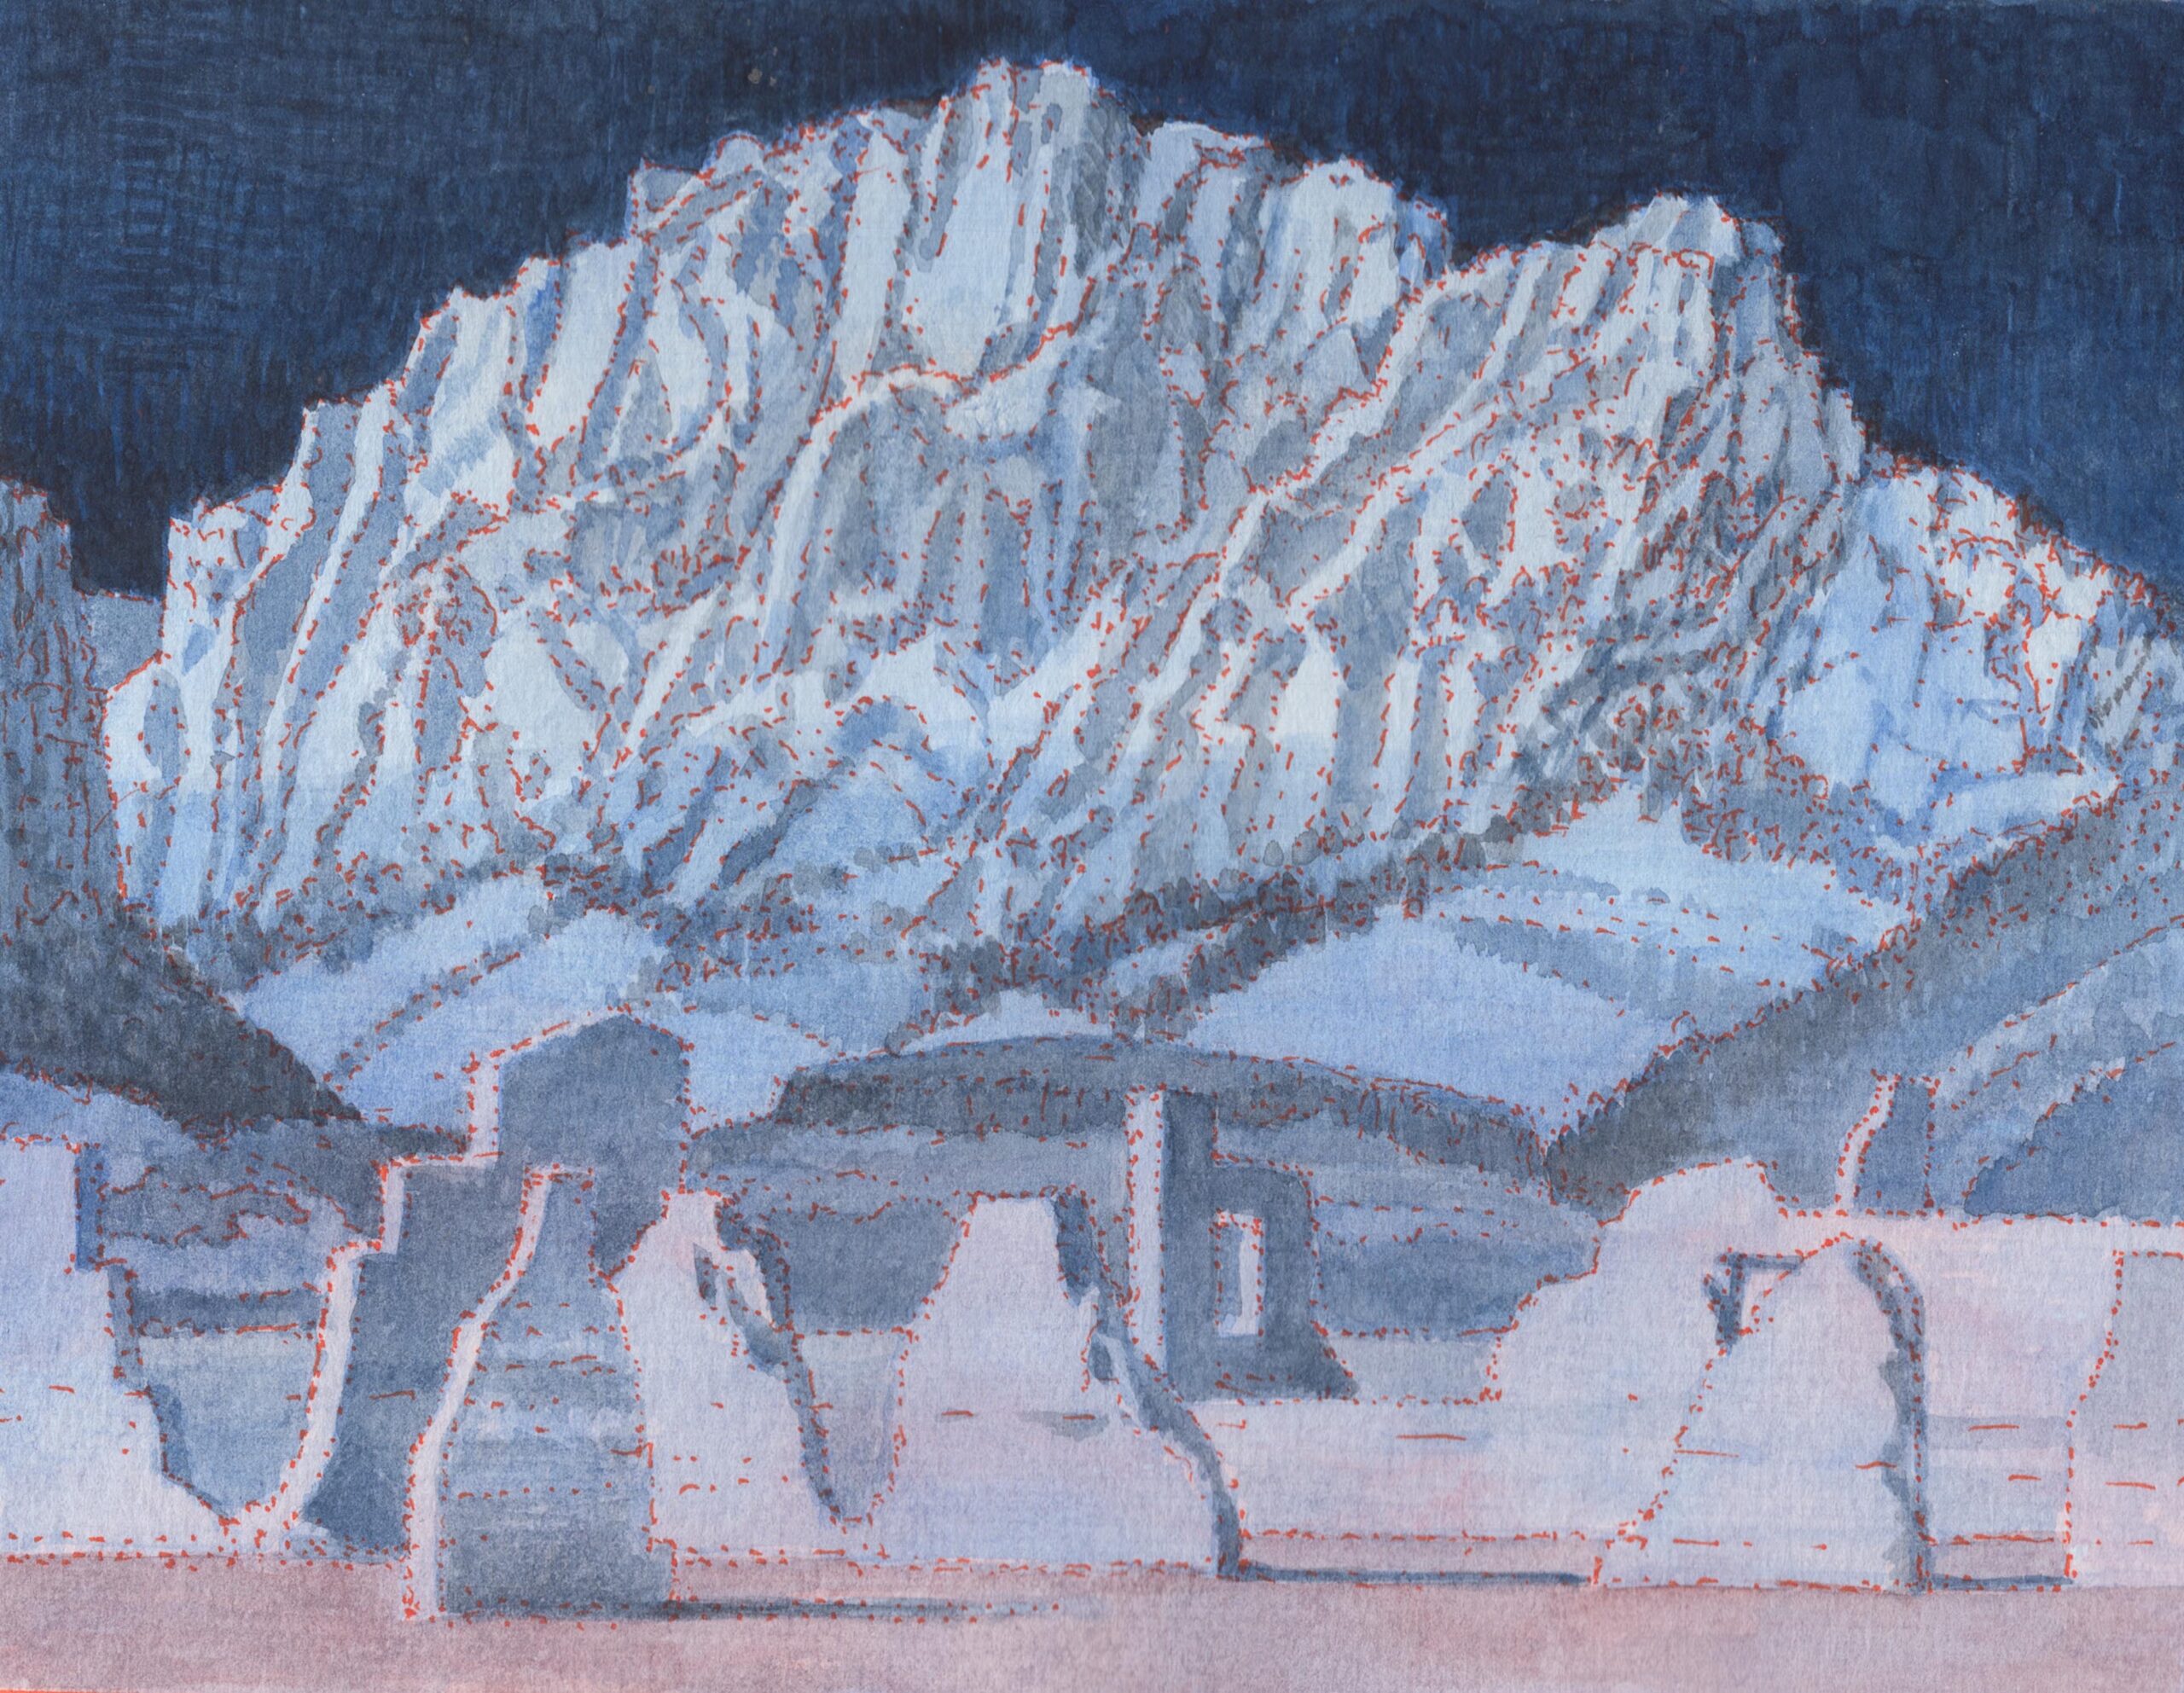 
							

									James McElhinney									Mountain Elegy 									wtercolor on paper<br />
7 x 10 inches									


							